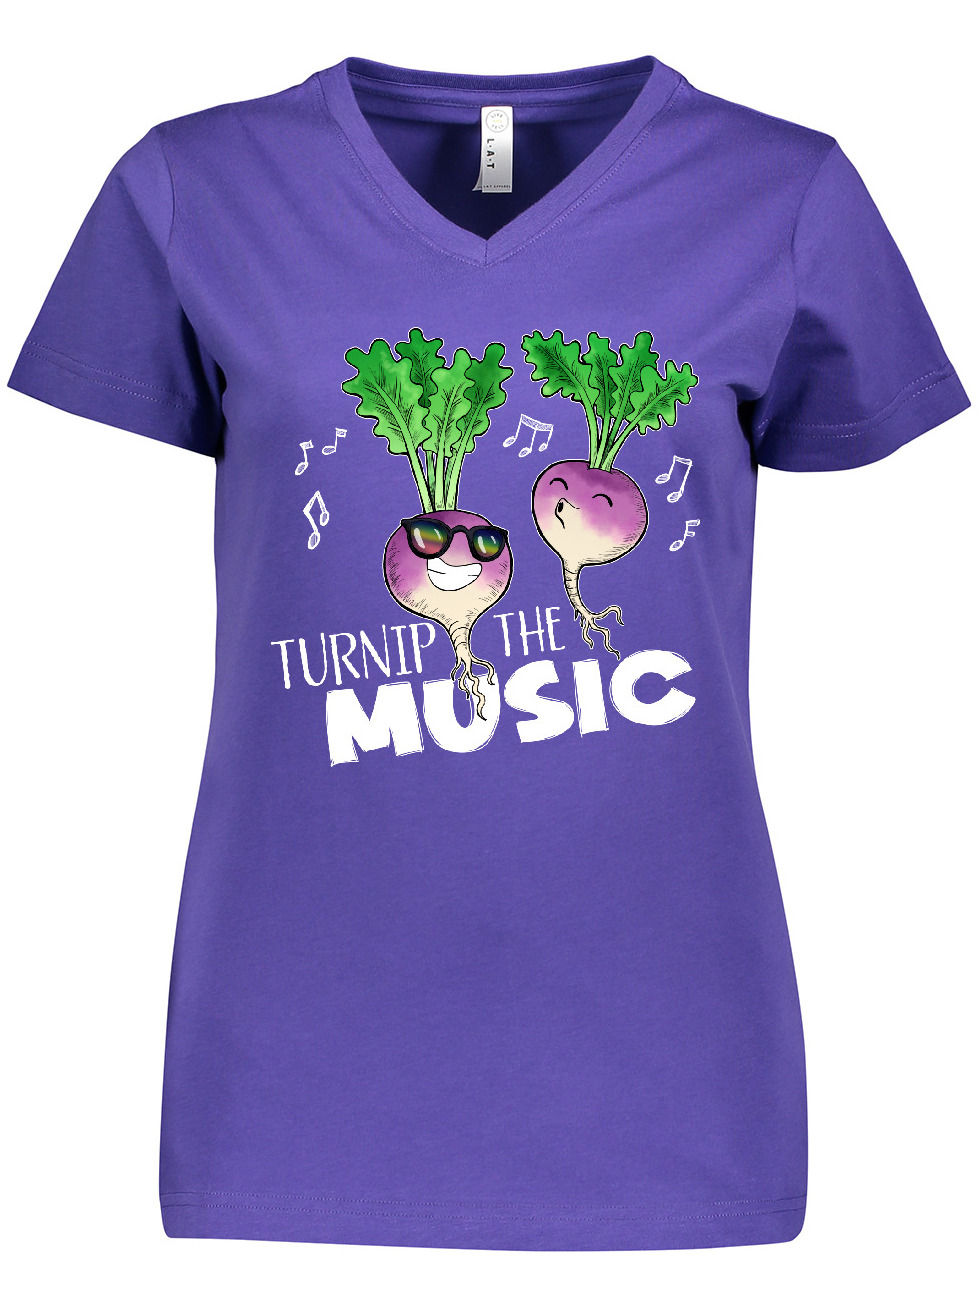 Inktastic Turnip the Music Partying Vegetables Women's V-Neck T-Shirt - image 1 of 4